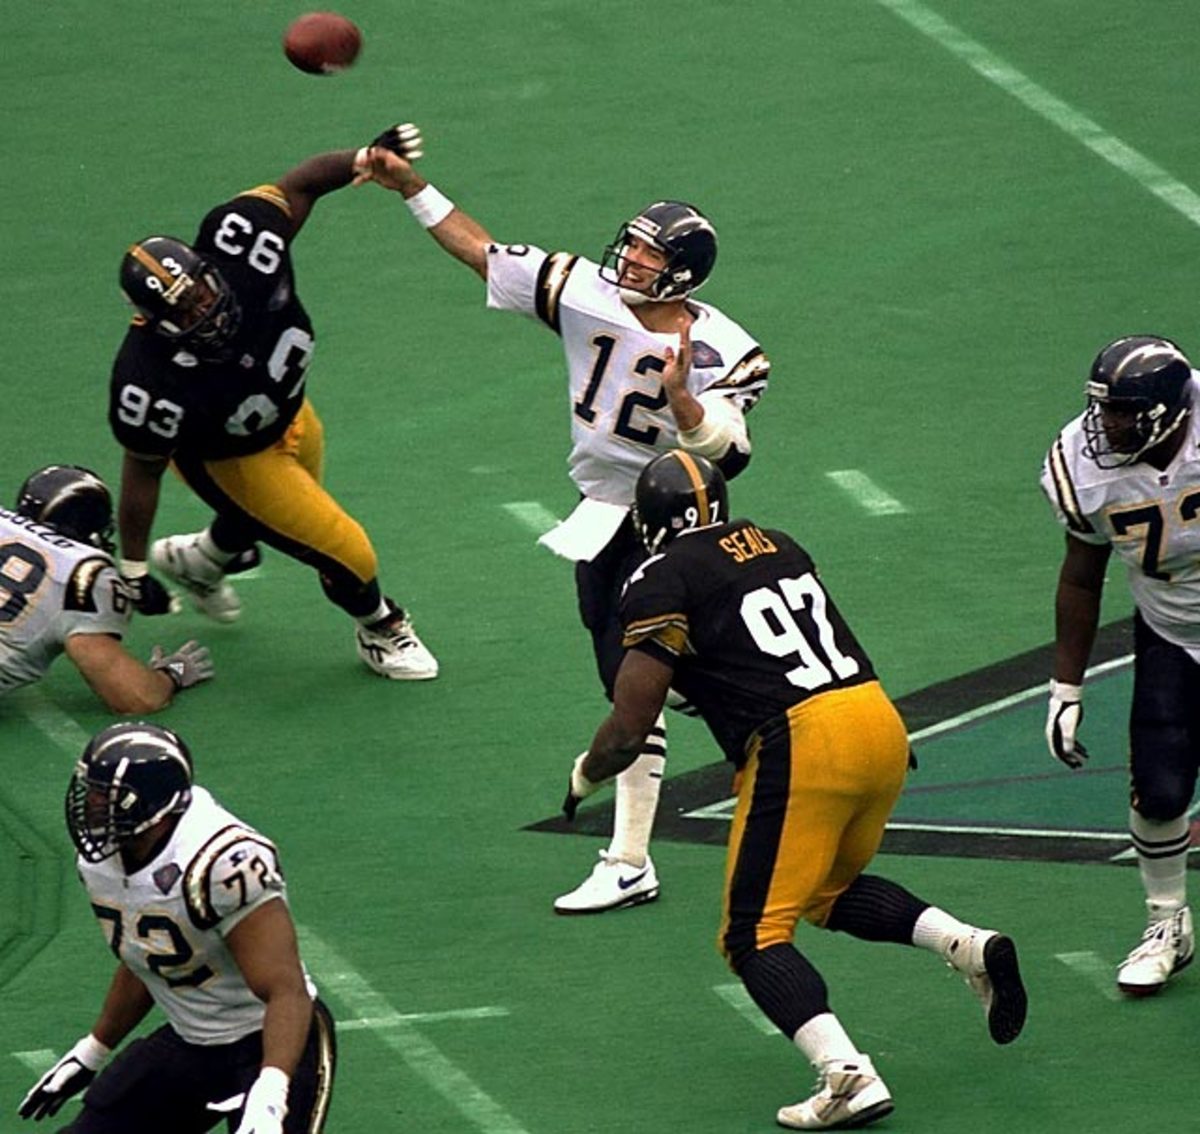 1994: Chargers 17, Steelers 13